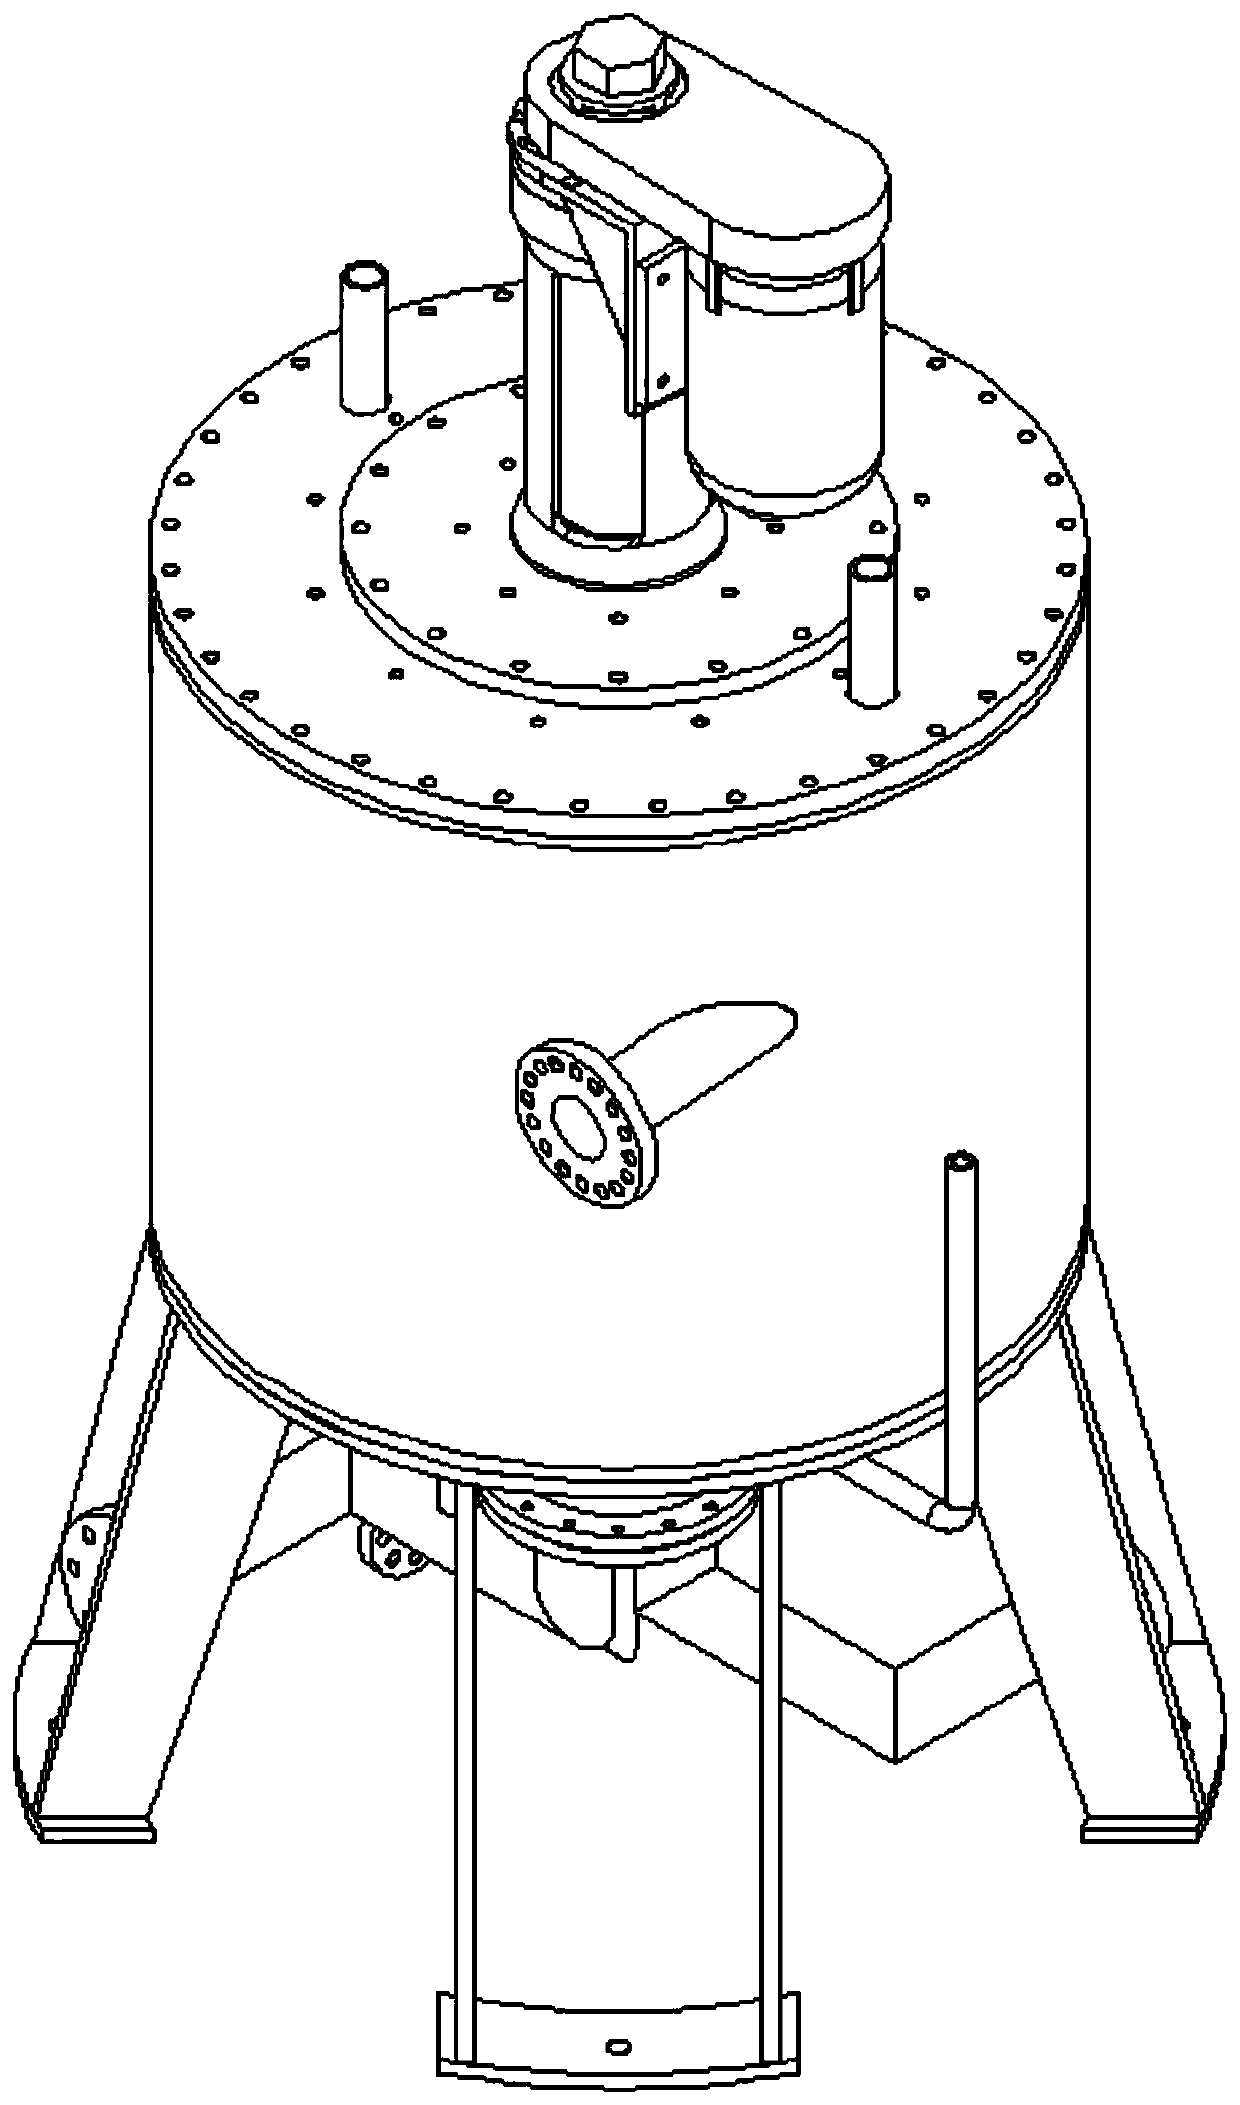 Centrifugal extractor with stirring, mixing and feeding functions